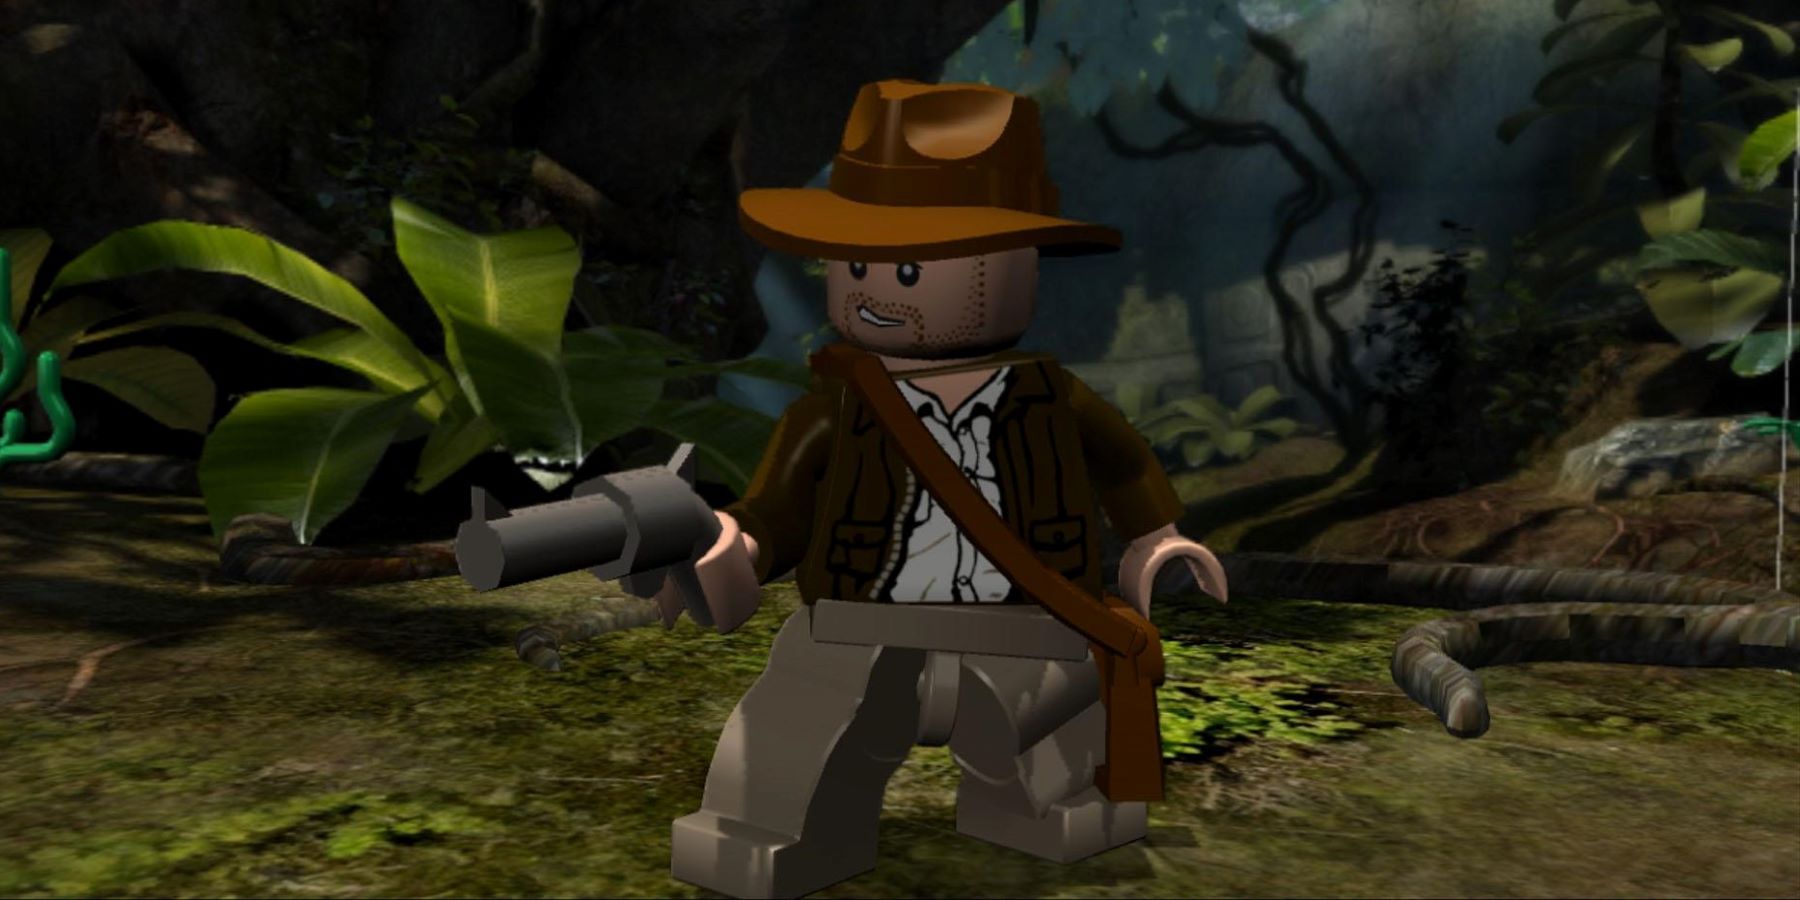 LEGO Indiana Jones standing in a jungle and holding a revolver